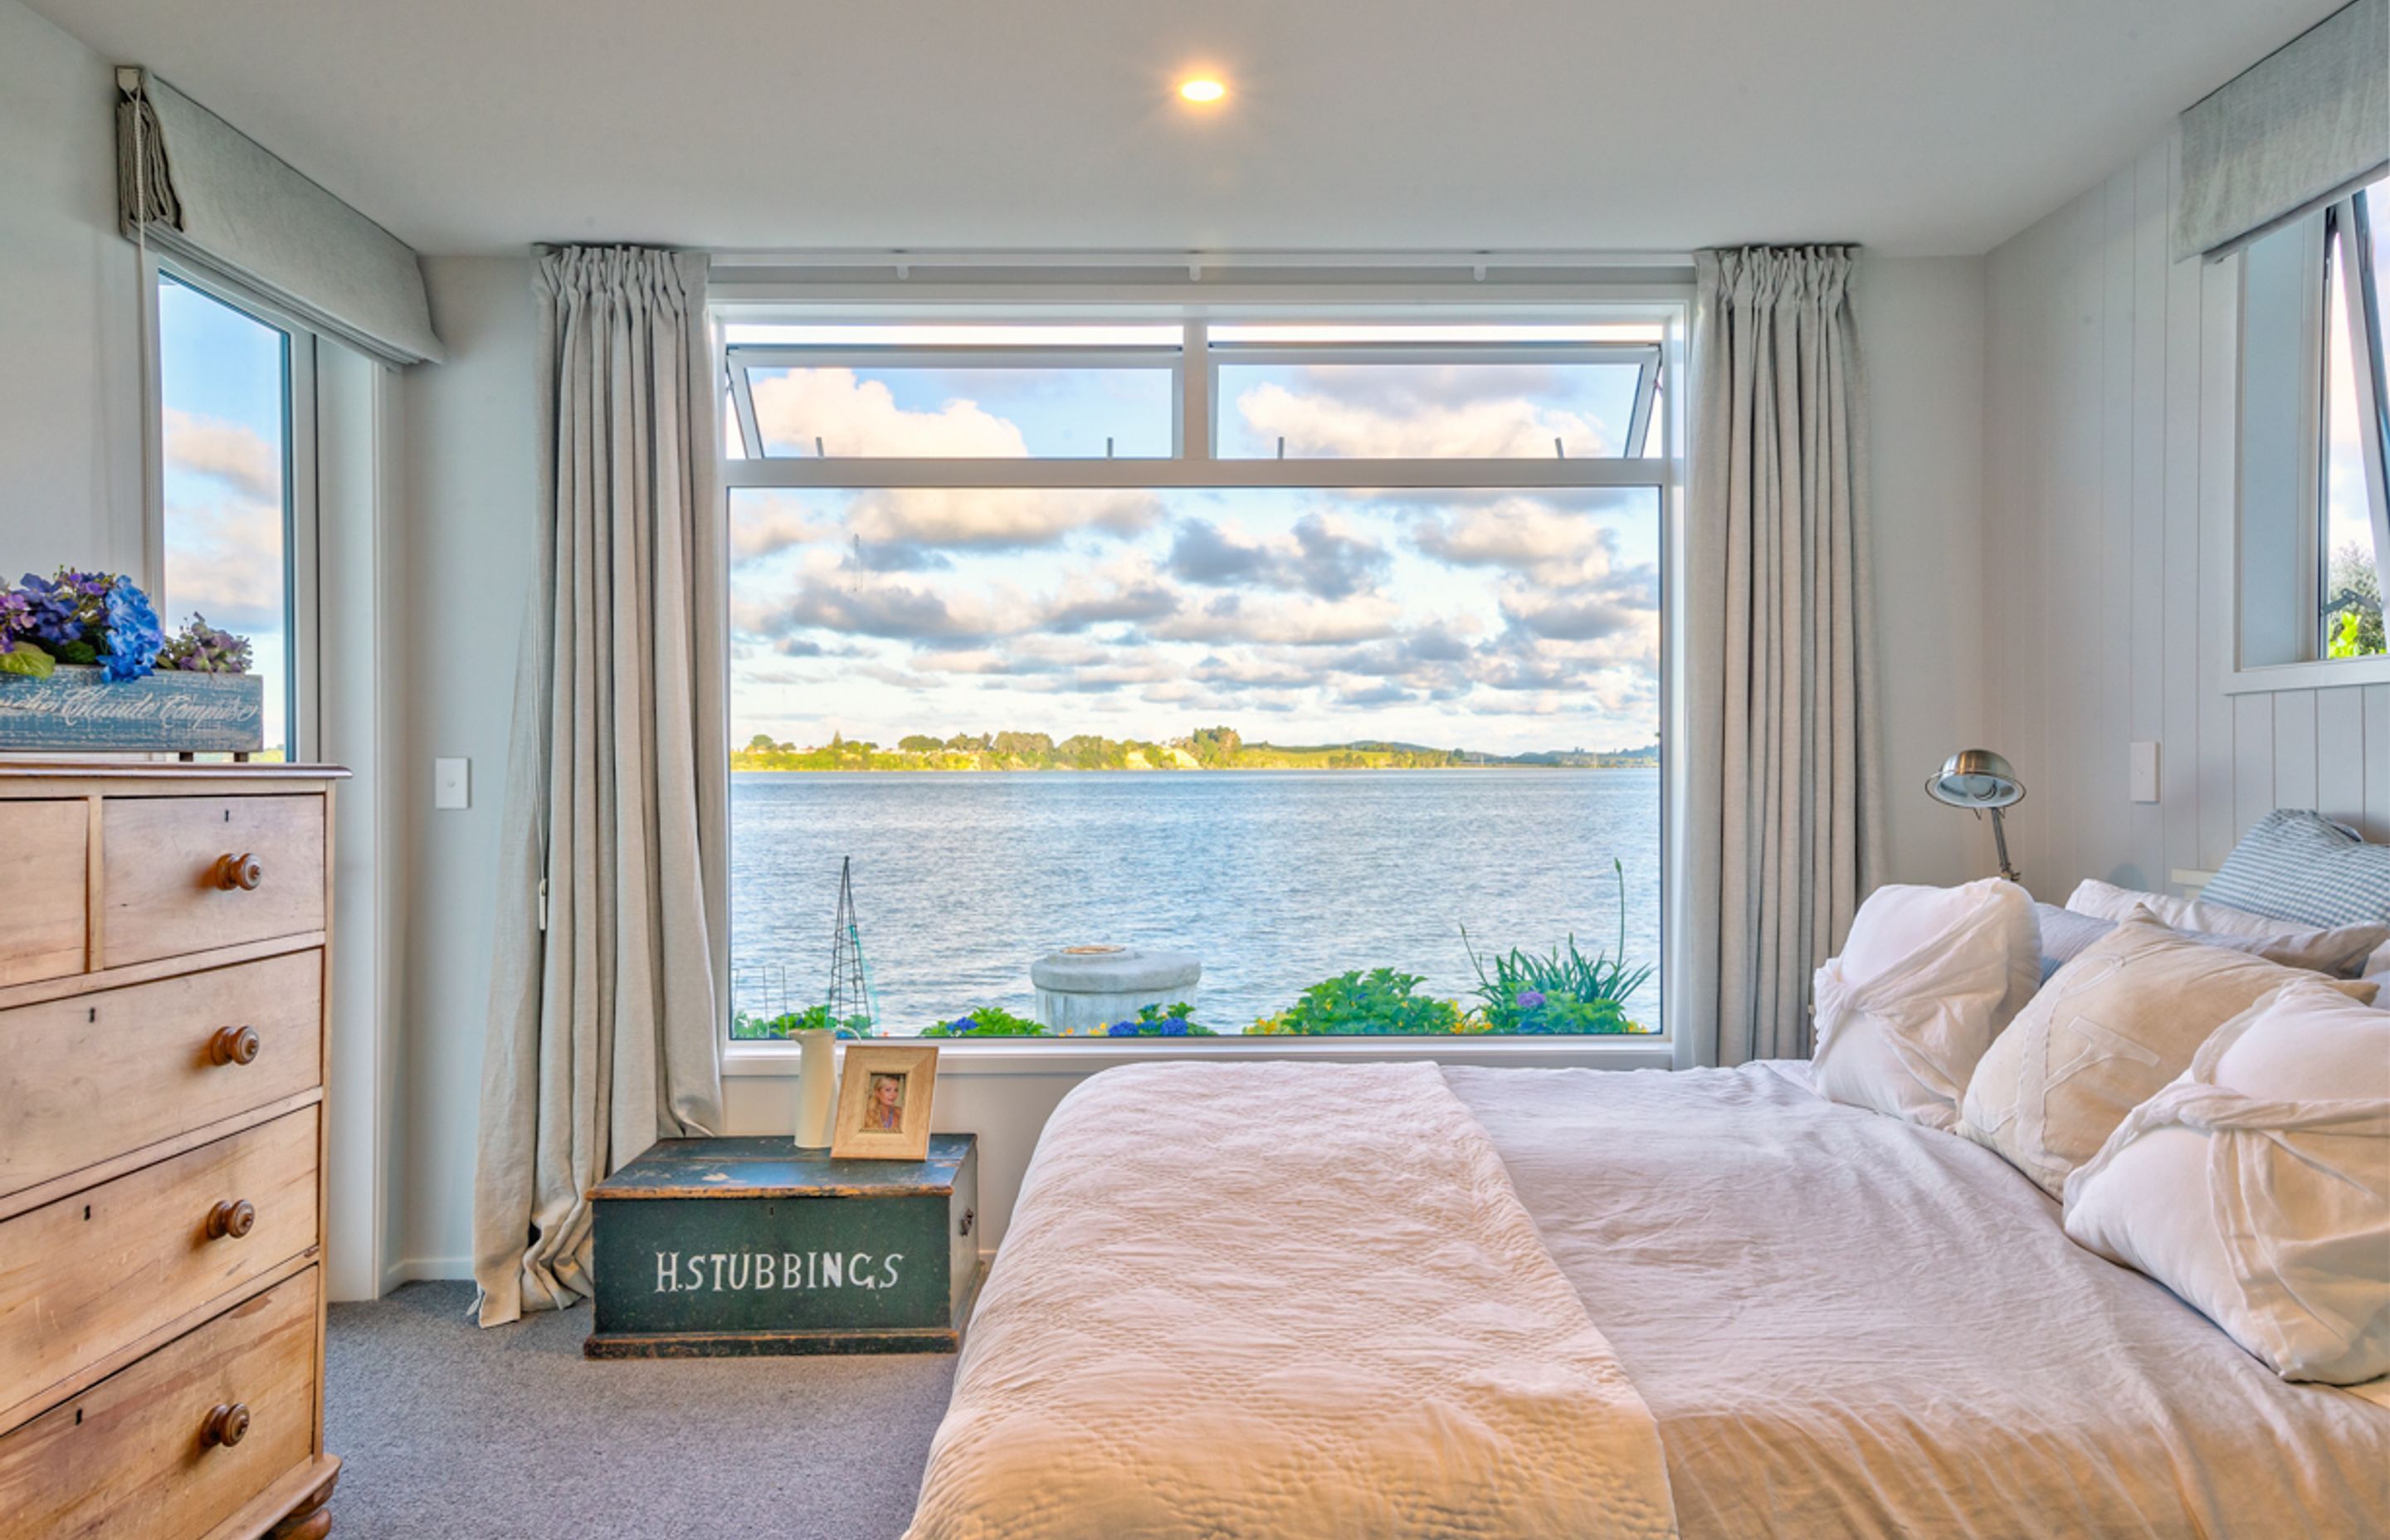 Master suite has incredible harbour views; a space of peace and serenity.